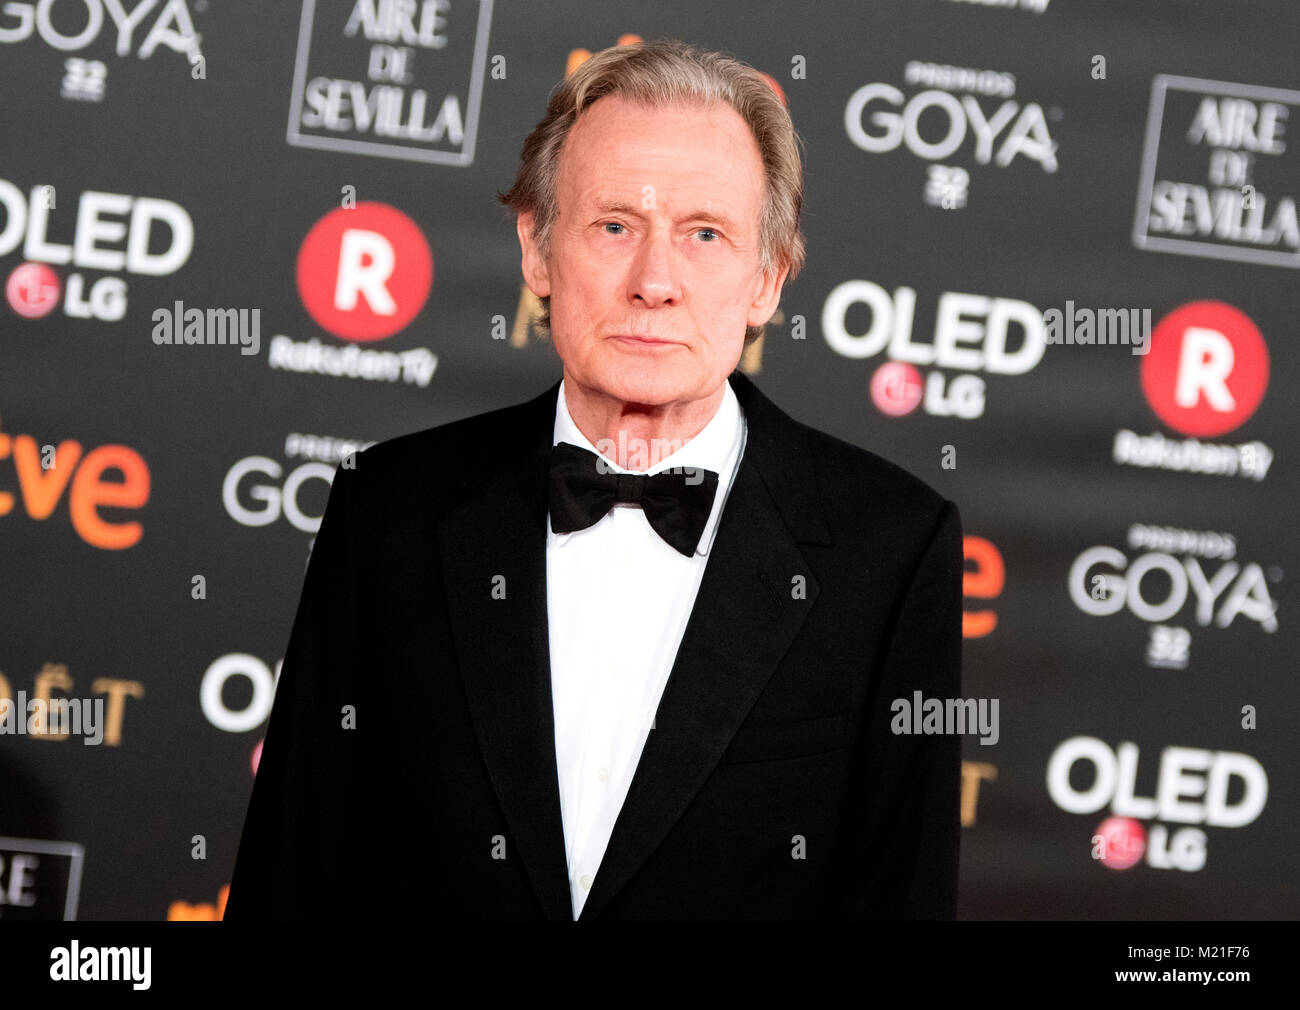 Madrid, Spain. 3rd British actor Bill Nighy and nomine for Secundary actor February, 2018. during the red carpet of Spanish Film Awards 'Goya' on February 3, 2018 in Madrid, Spain. ©David Gato/Alamy Live News Stock Photo